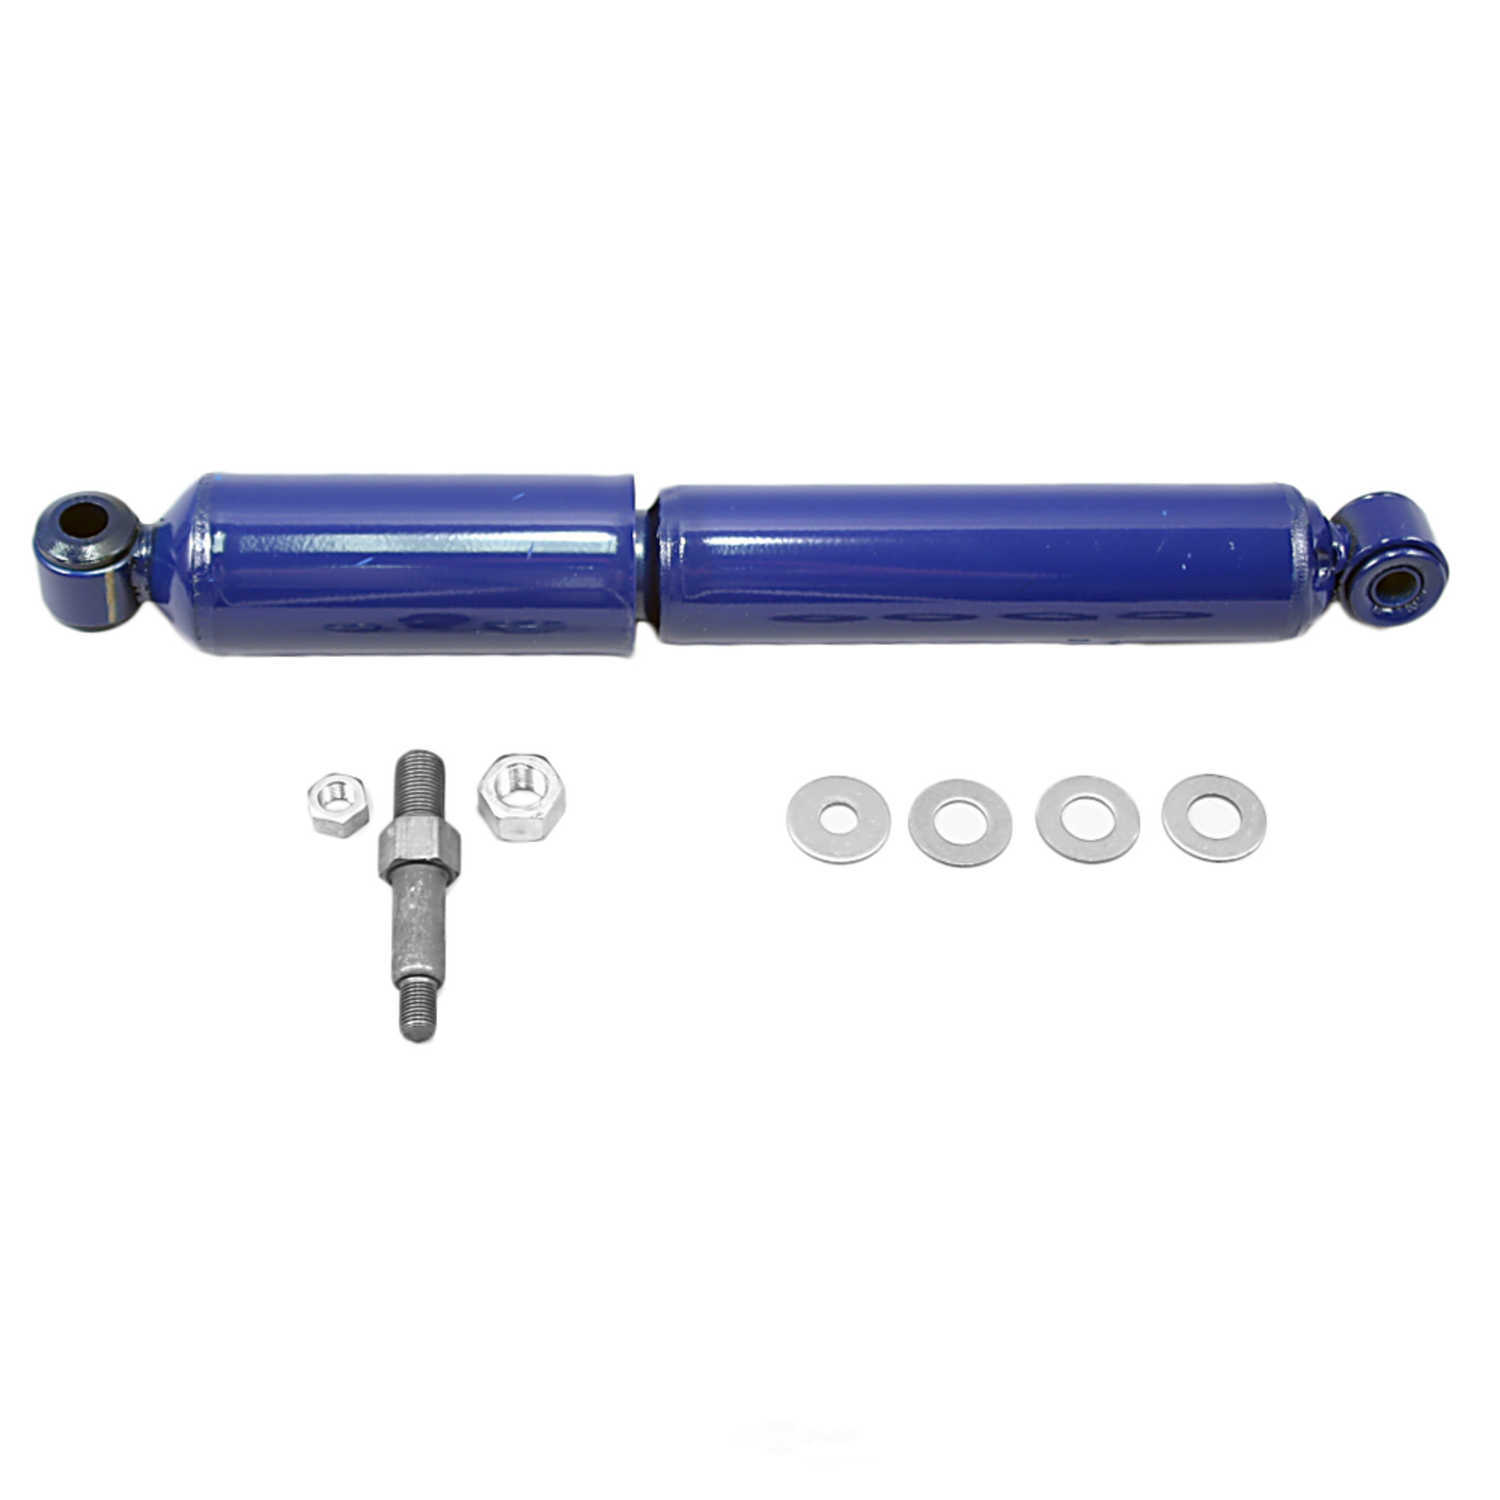 MONROE SHOCKS/STRUTS - Monro-Matic Plus Shock Absorber (With ABS Brakes, Front) - MOE 32361